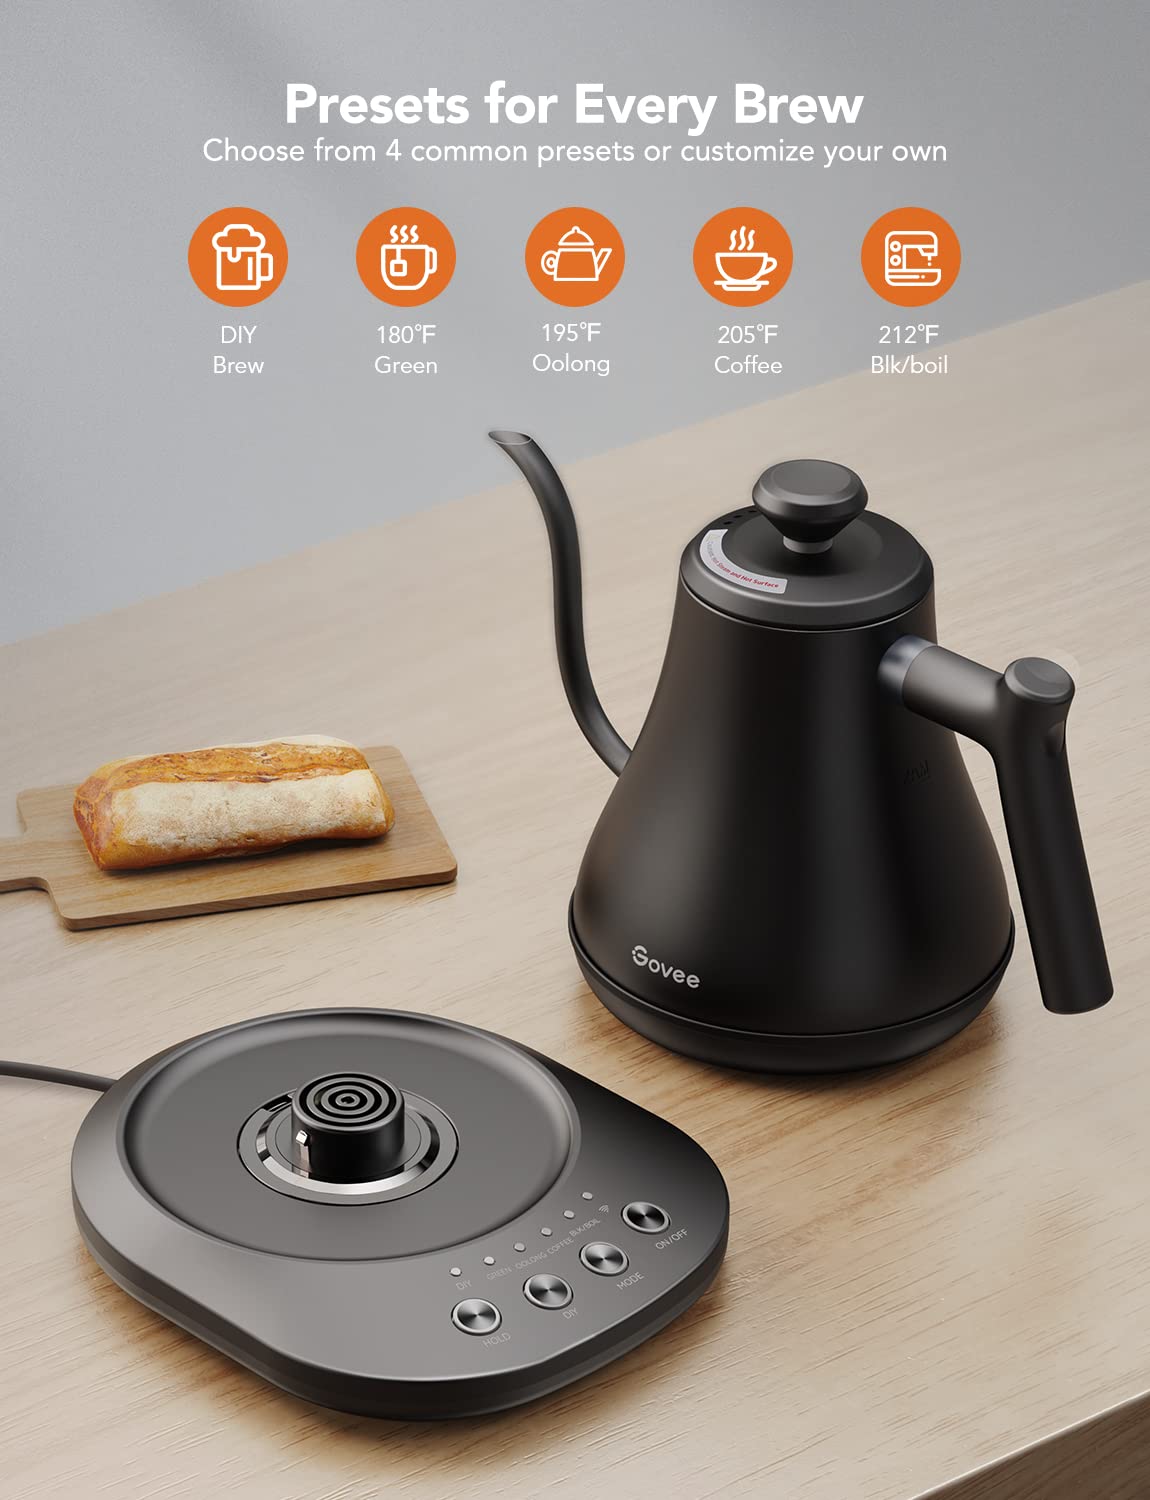 Govee Smart Electric Kettle, WiFi Variable Temperature Control Gooseneck Kettle, Pour Over Kettle and Tea Kettle, Alexa Control, 1200W Quick Heating, 100% Stainless Steel, 0.8L, Matte Black